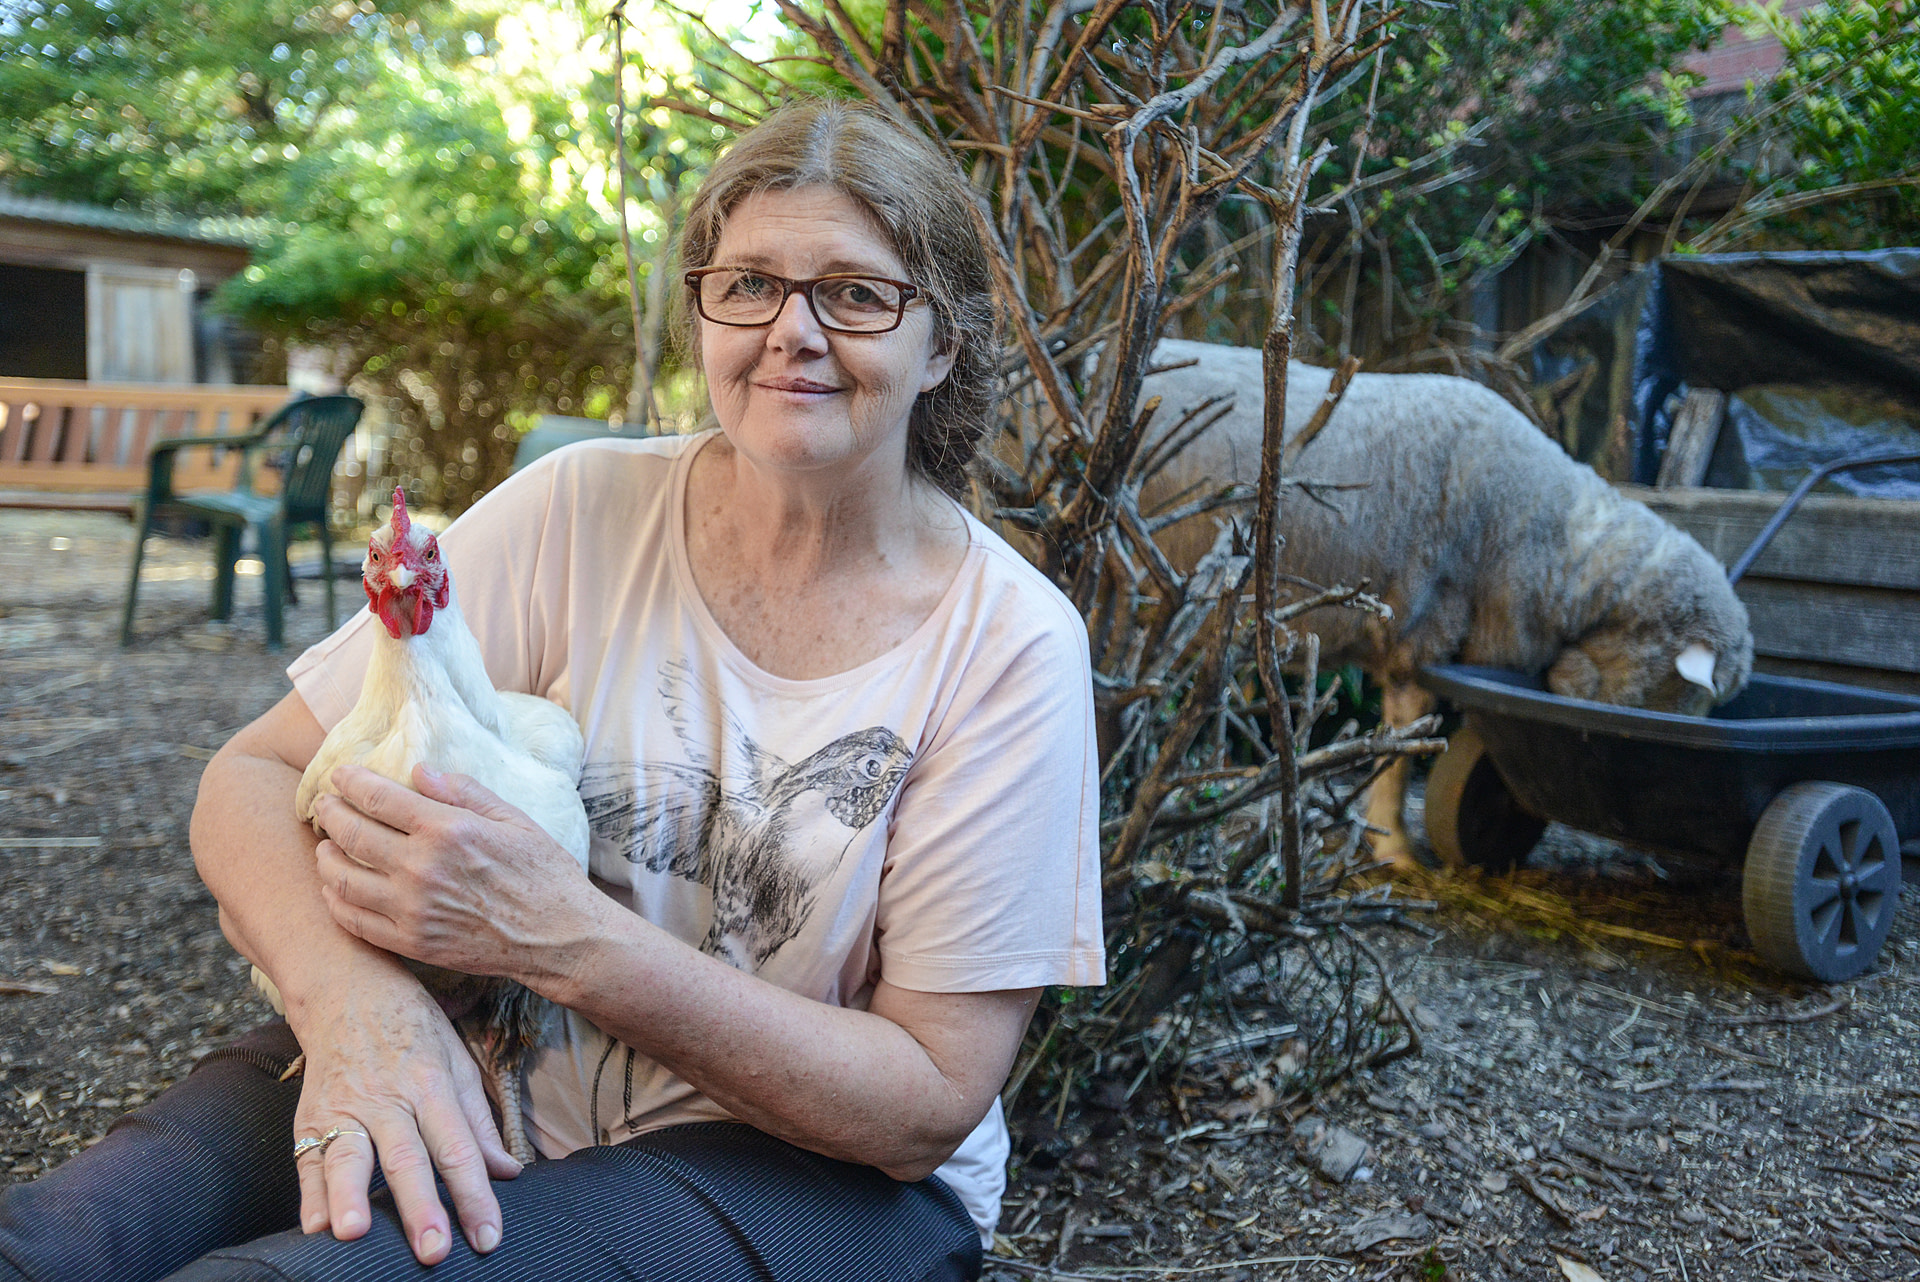 Patty Mark holds Susie, a rescued hen formerly used for breeding in the broiler chicken industry. In the background, Prince, a rescued sheep born inside a slaughterhouse, snuffles through the contents of a wheelbarrow. Australia, 2013. Jo-Anne McArthur / Animal Liberation Victoria / We Animals Media